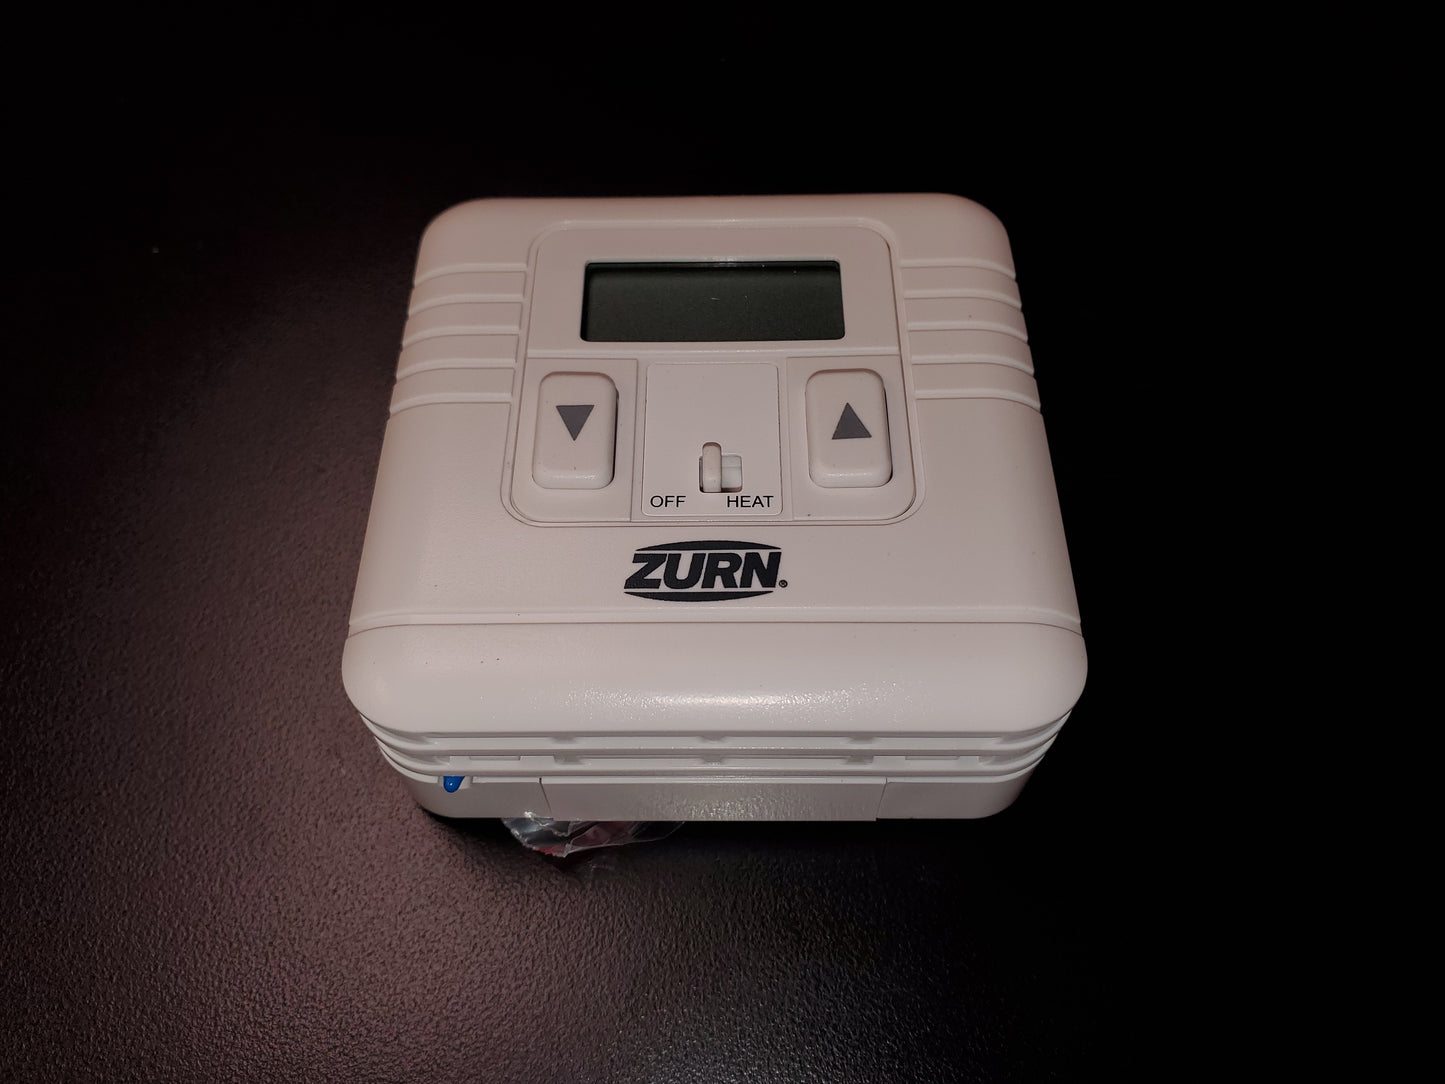 24 VOLT HARD-WIRED DIGITAL NON-PROGRAMMABLE THERMOSTAT